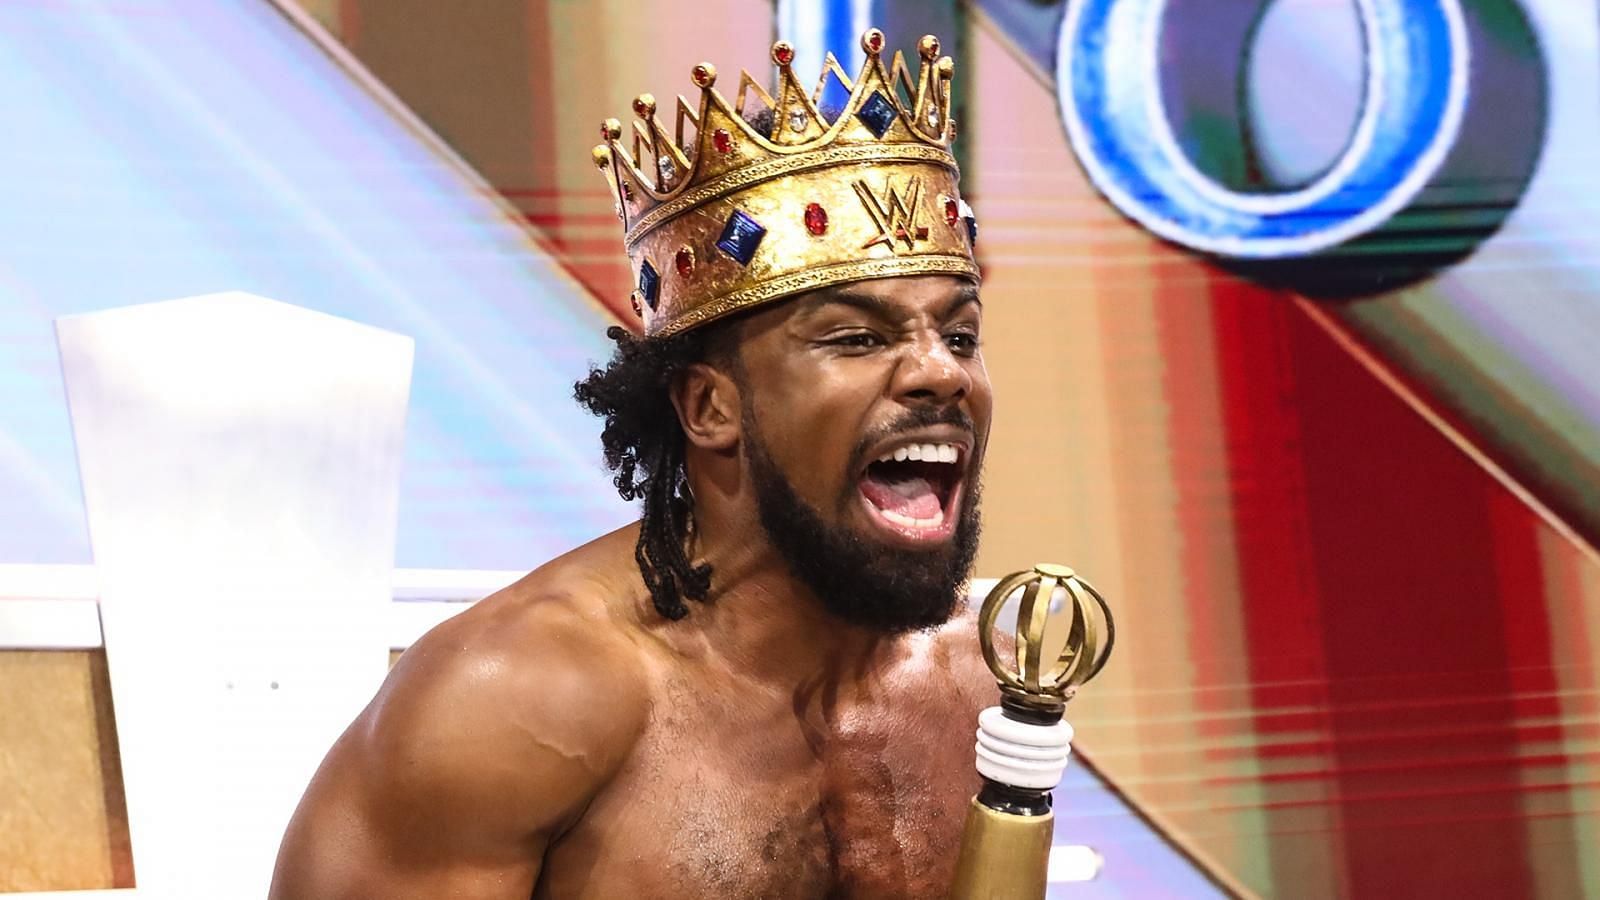 Xavier Woods won King of the Ring at Crown Jewel